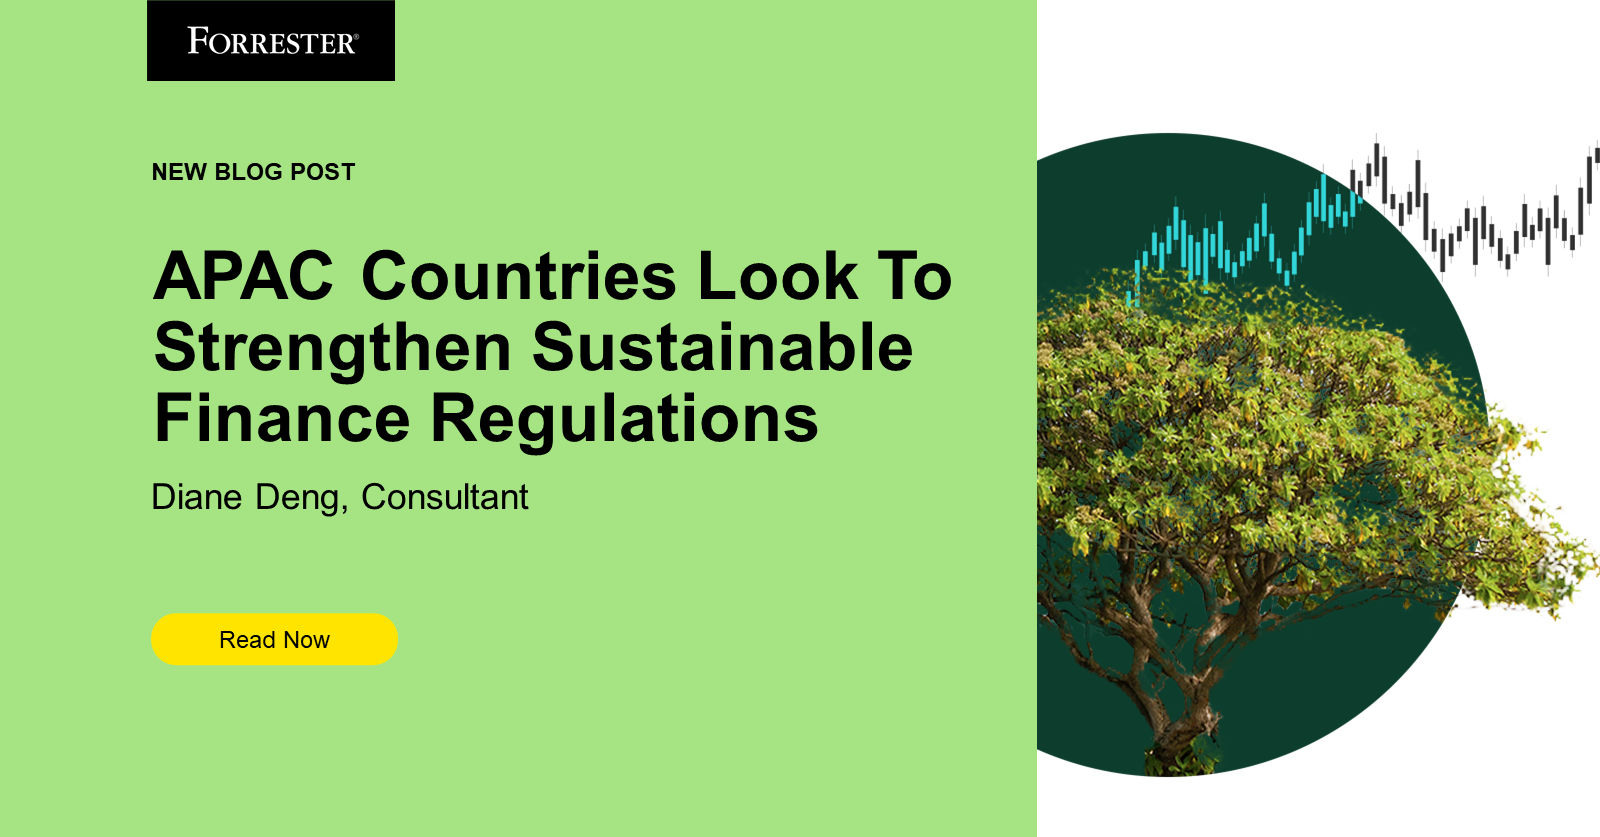 APAC Countries Look To Strengthen Sustainable Finance Regulations